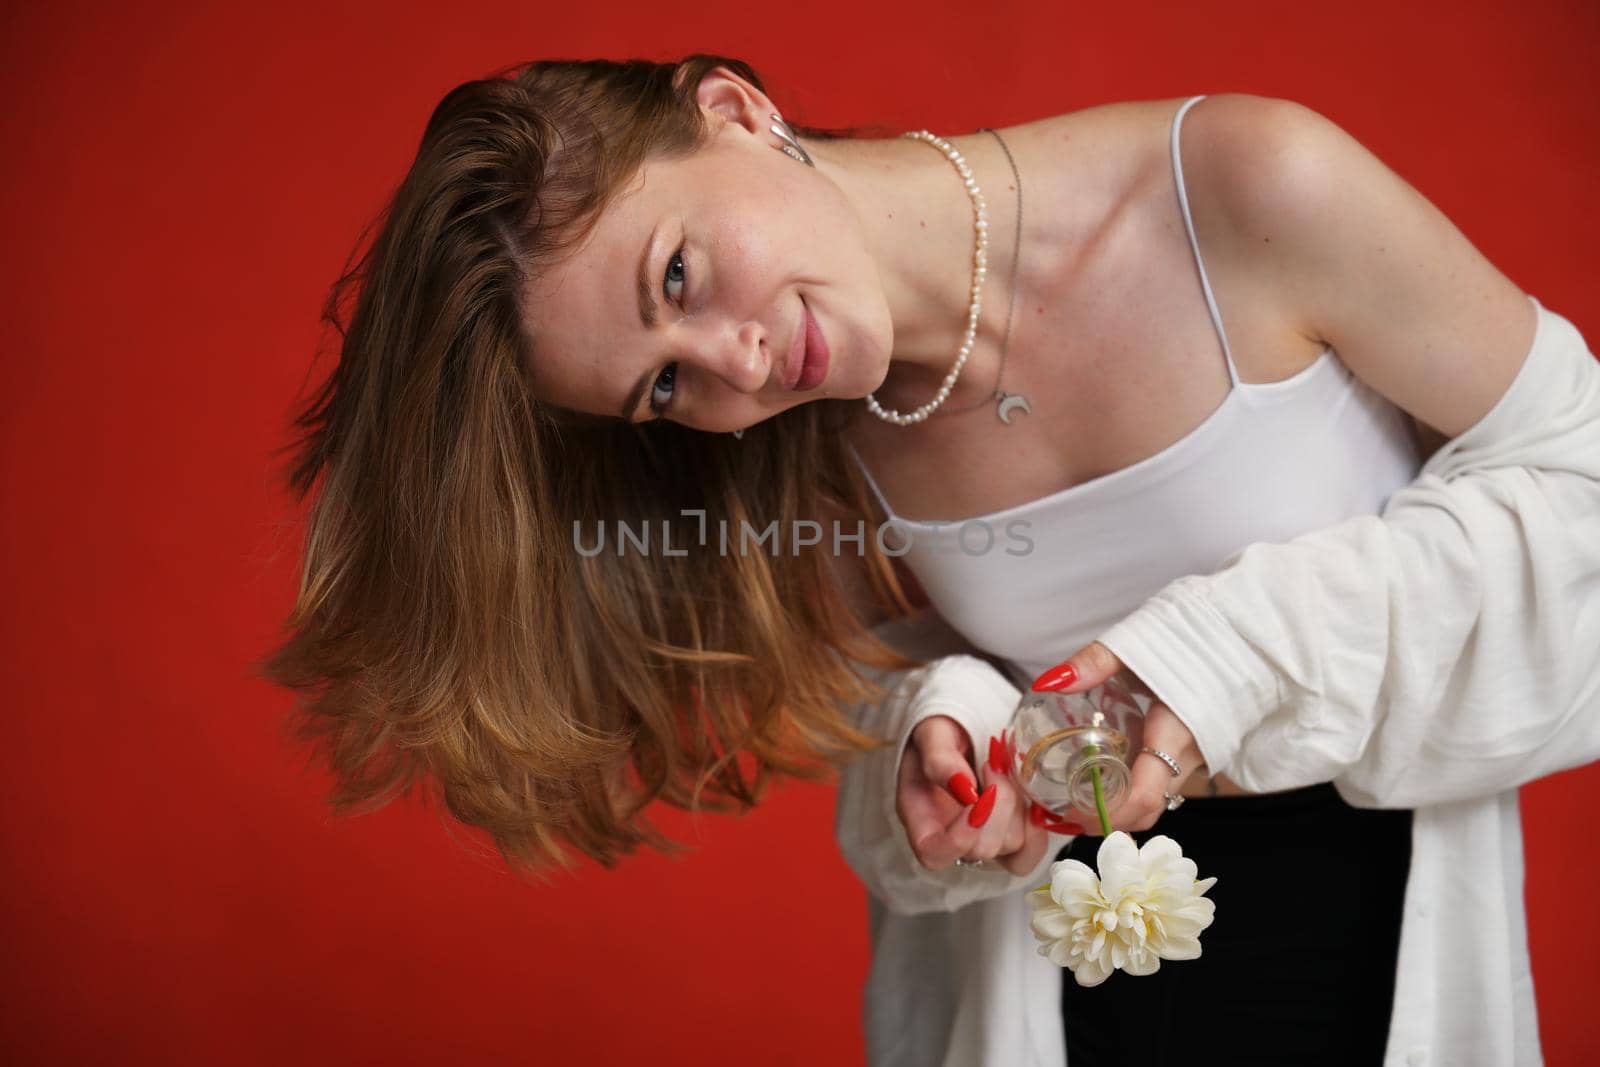 Smiling girl posing with flower in studio on red background